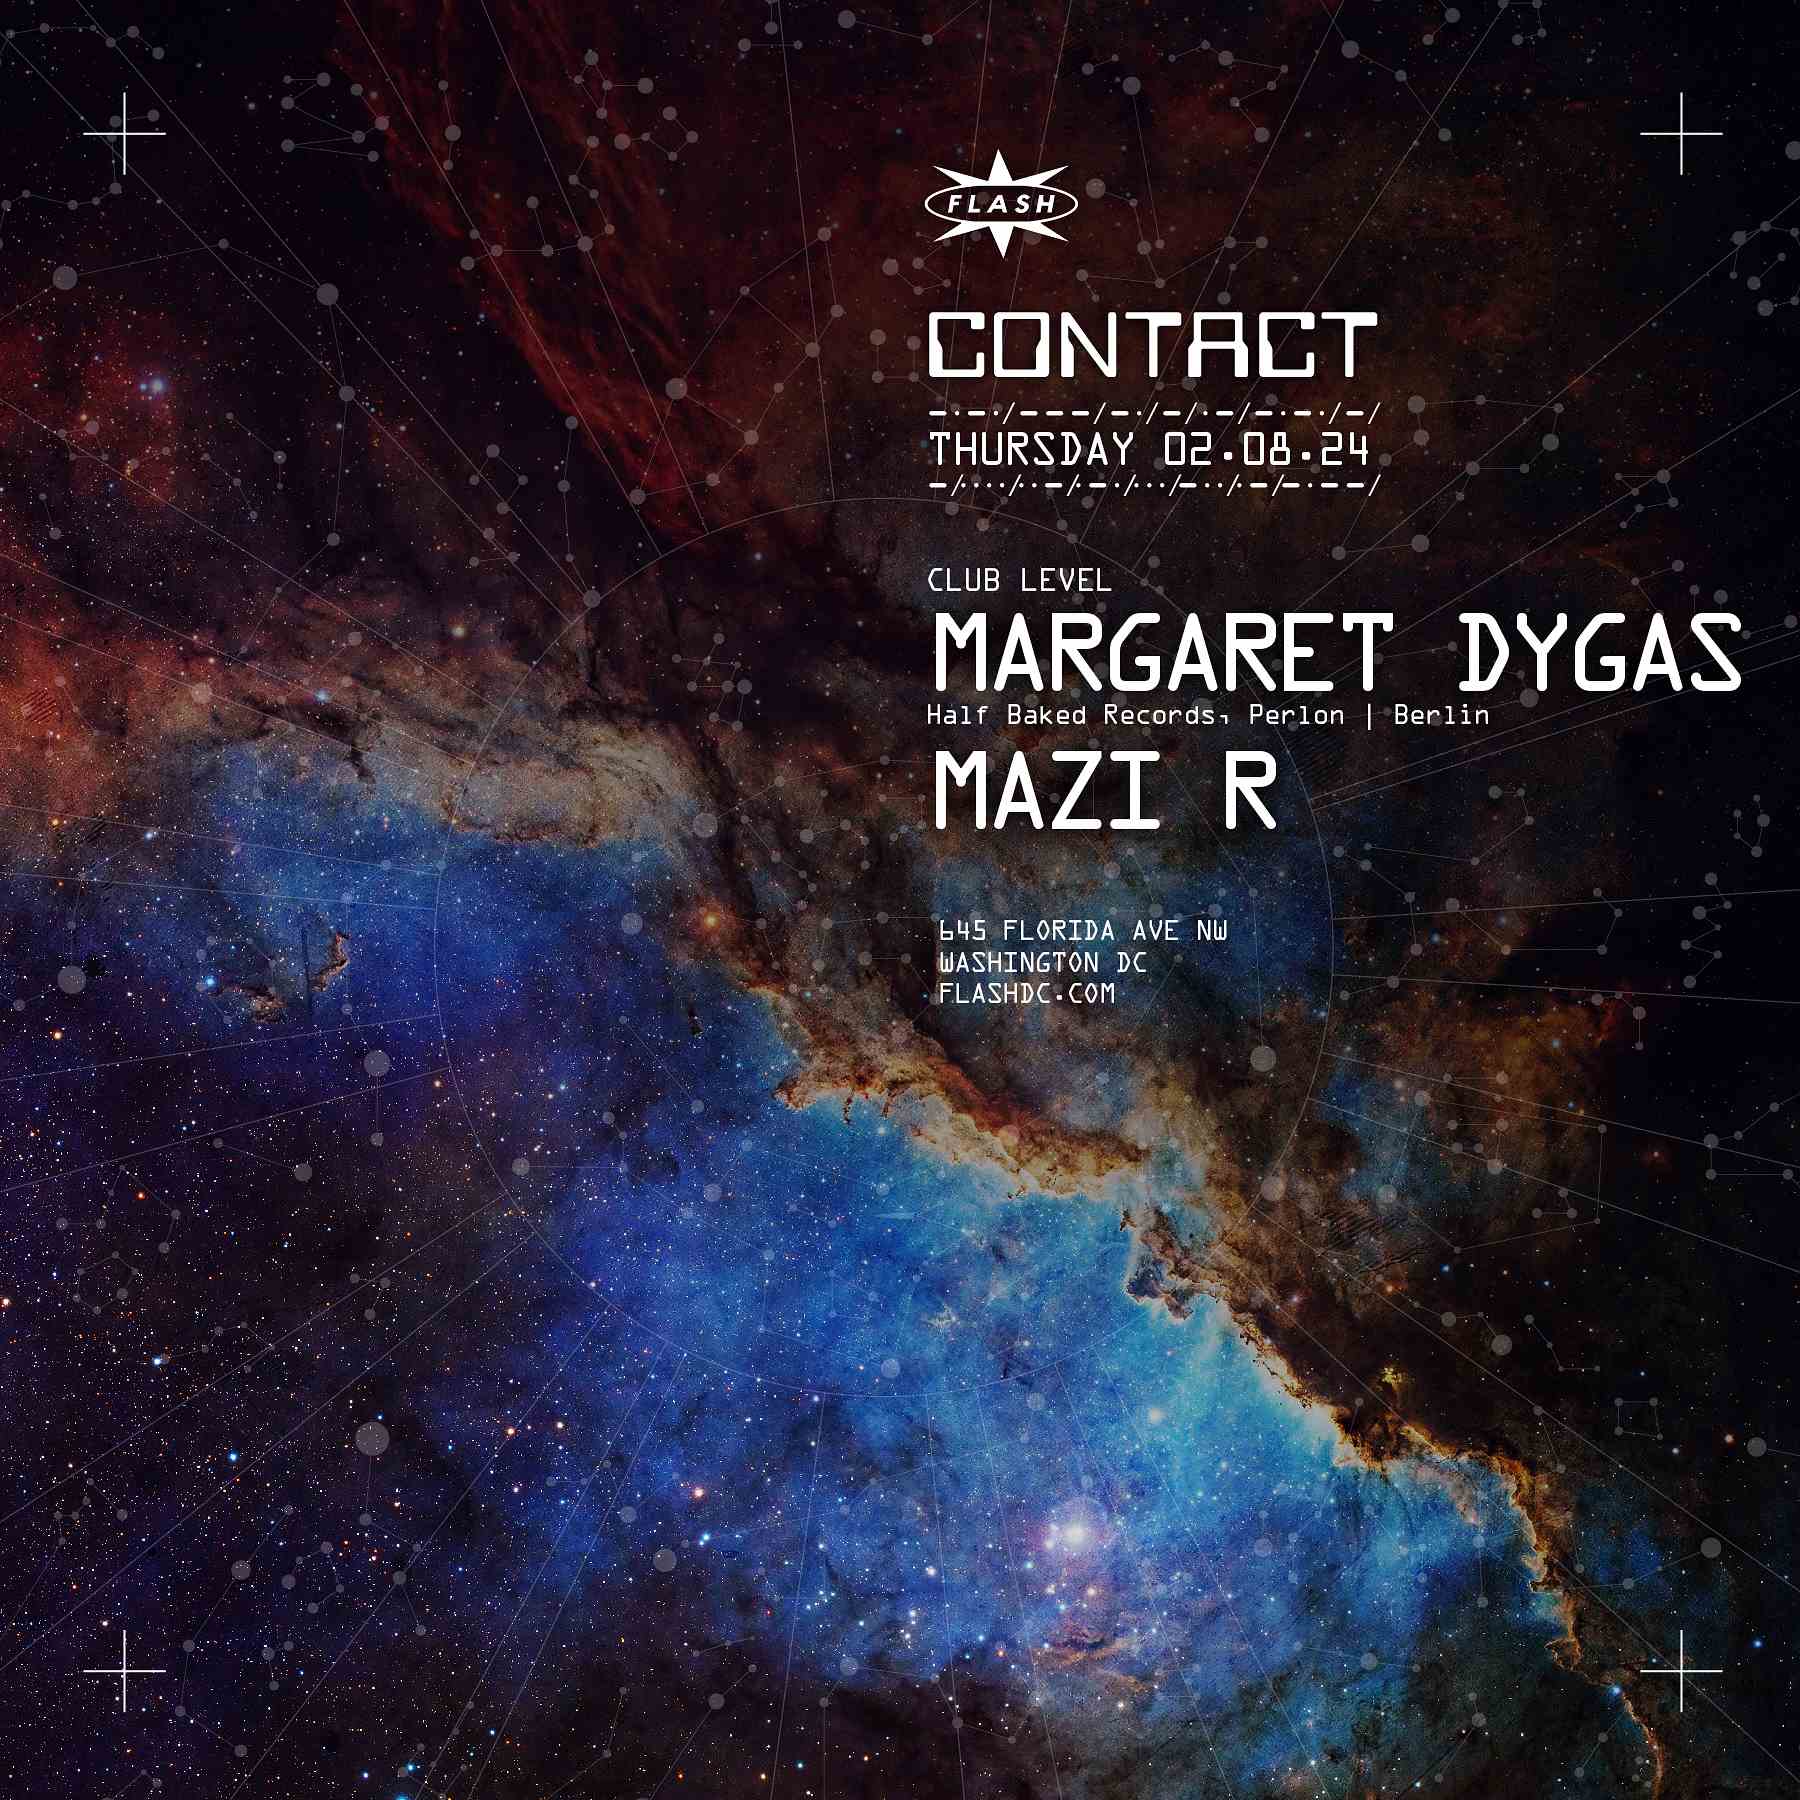 CONTACT: Margaret Dygas event flyer